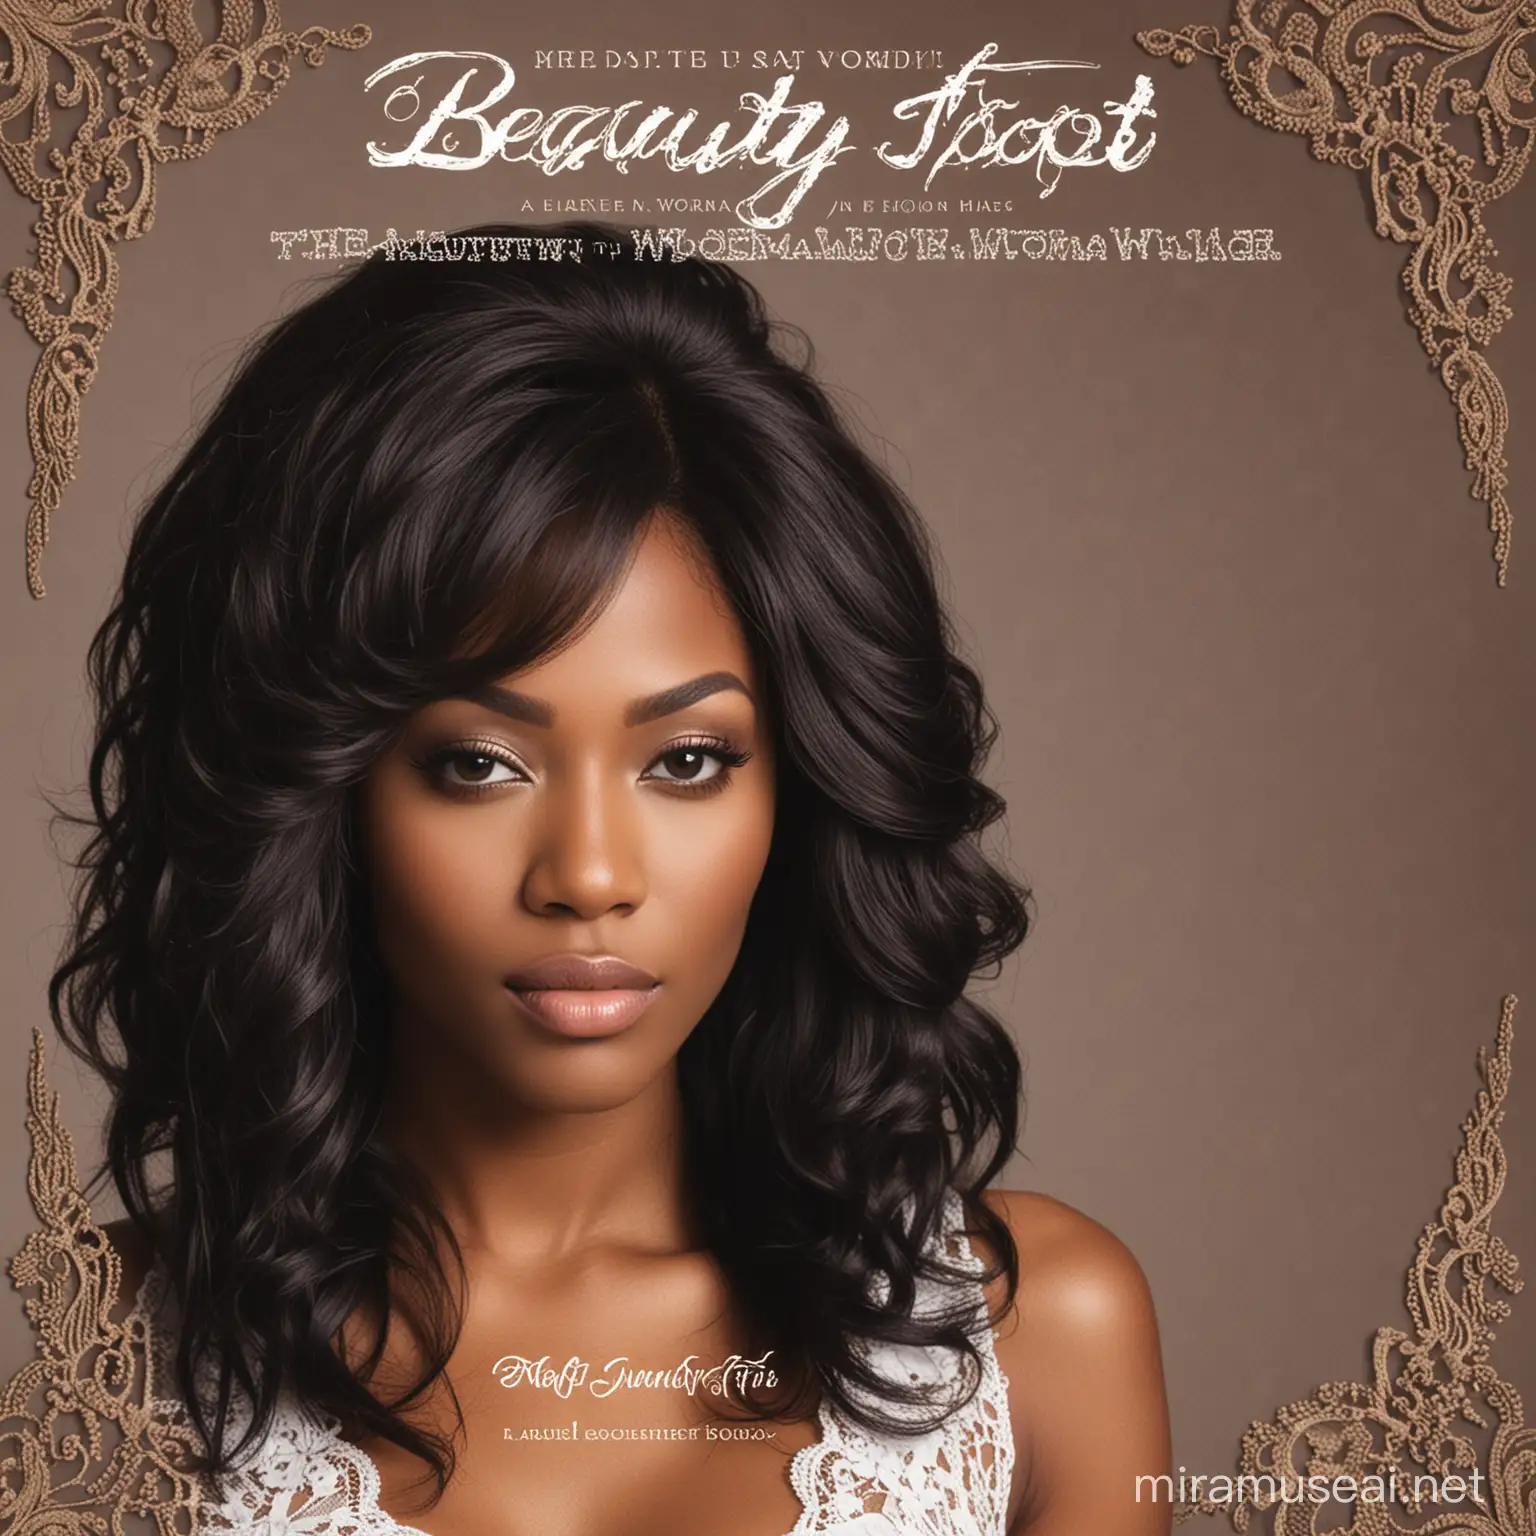 Album Cover The Beauty Spot Featuring a Modern Eboni Woman with Long Lace Front Wig